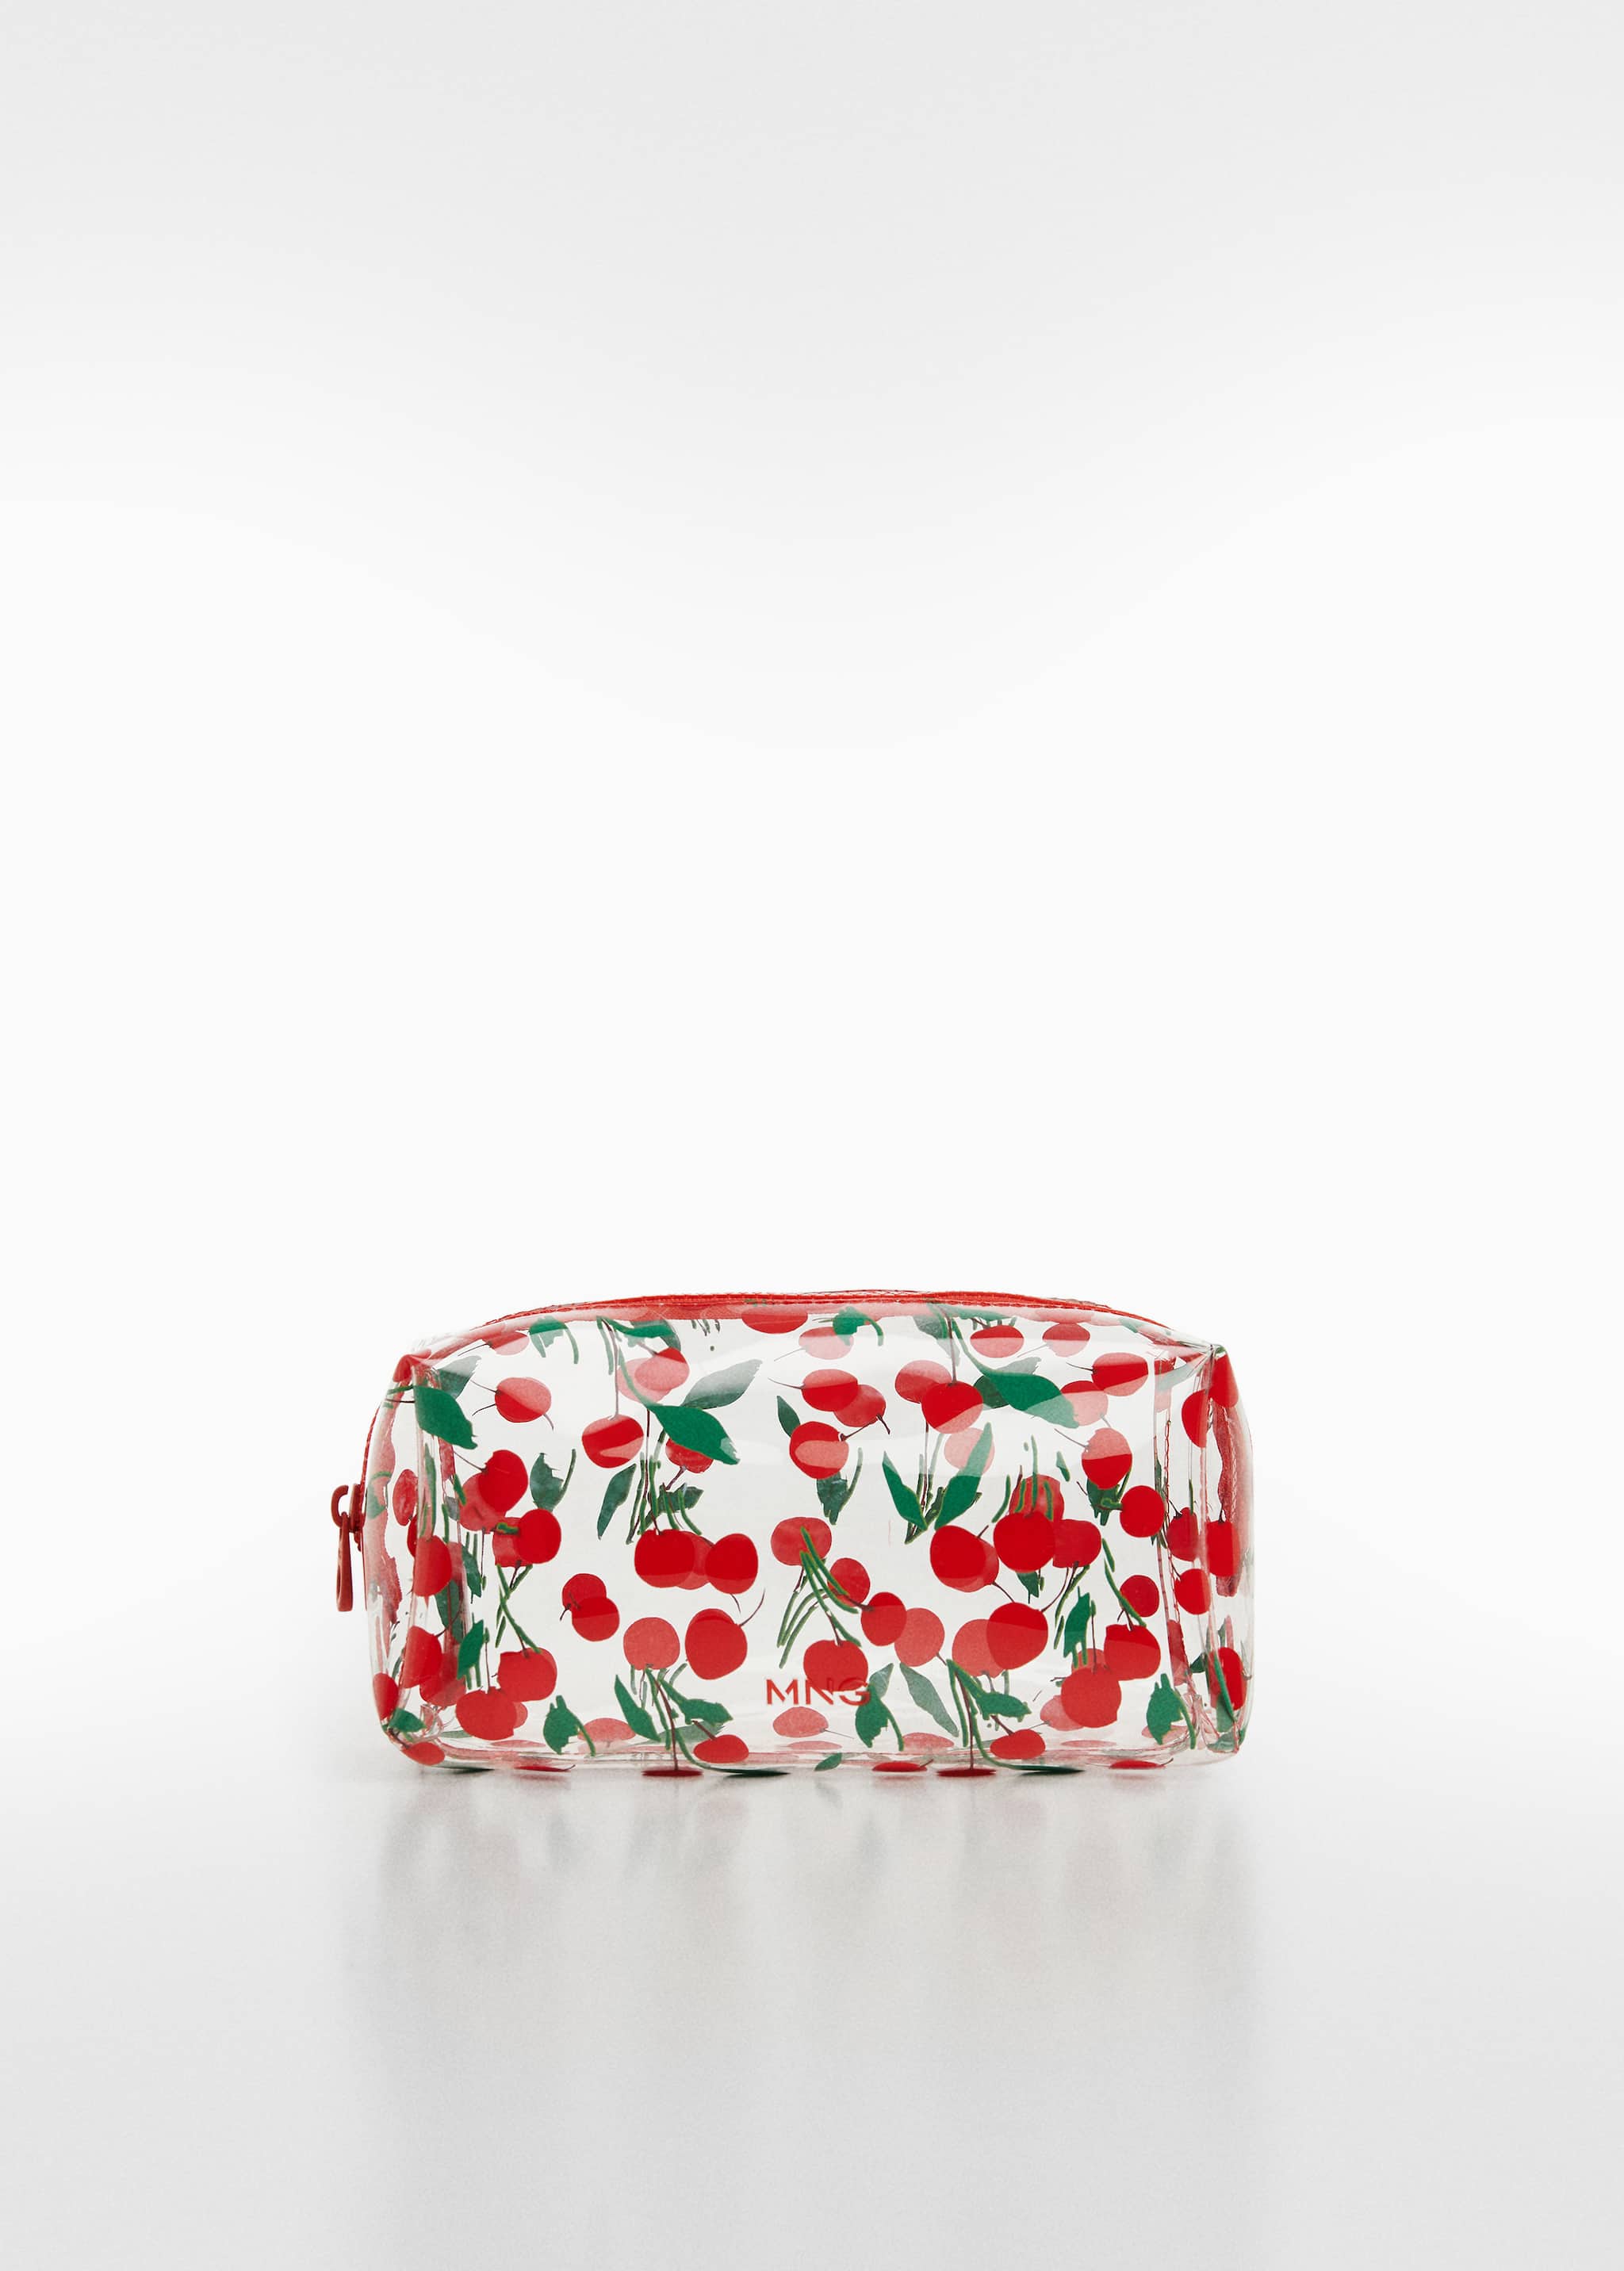 Transparent toiletry bag cherries - Article without model